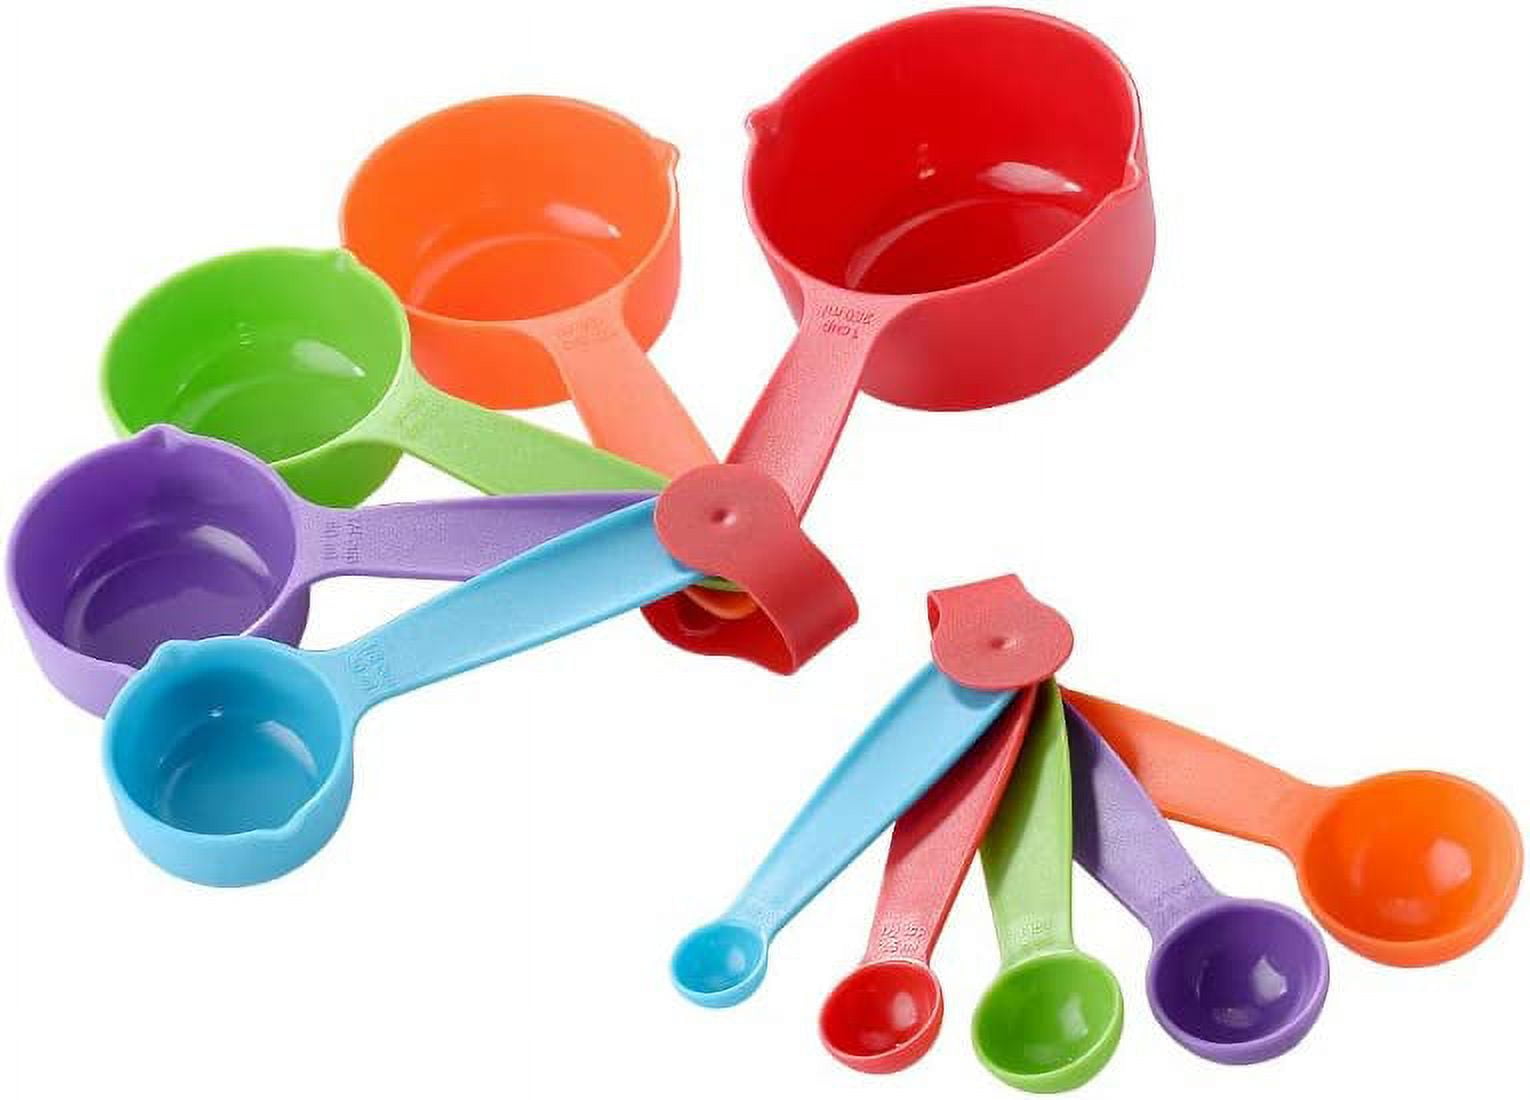 Classic Cuisine 10 -Piece Silicone Measuring Cup And Spoon Set